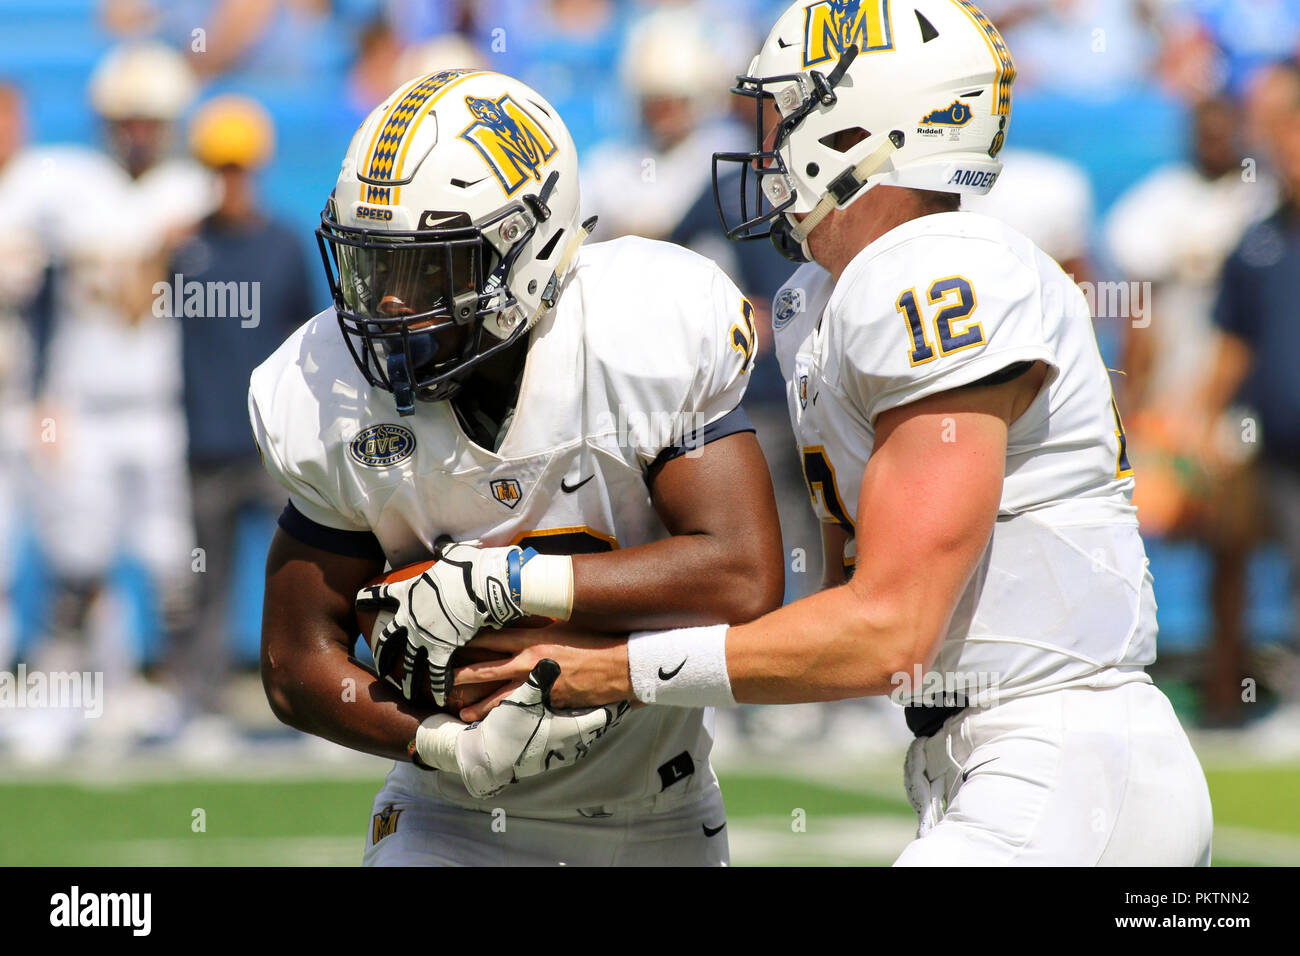 Lexington, Kentucky, USA. 15th Sep, 2018. Murray State Racers Rodney Castille (left) takes a handoff from Drew Anderson (right) during an NCAA football game between the Kentucky Wildcats and the Murray State Racers at Kroger Field in Lexington, Kentucky. Kevin Schultz/CSM/Alamy Live News Stock Photo